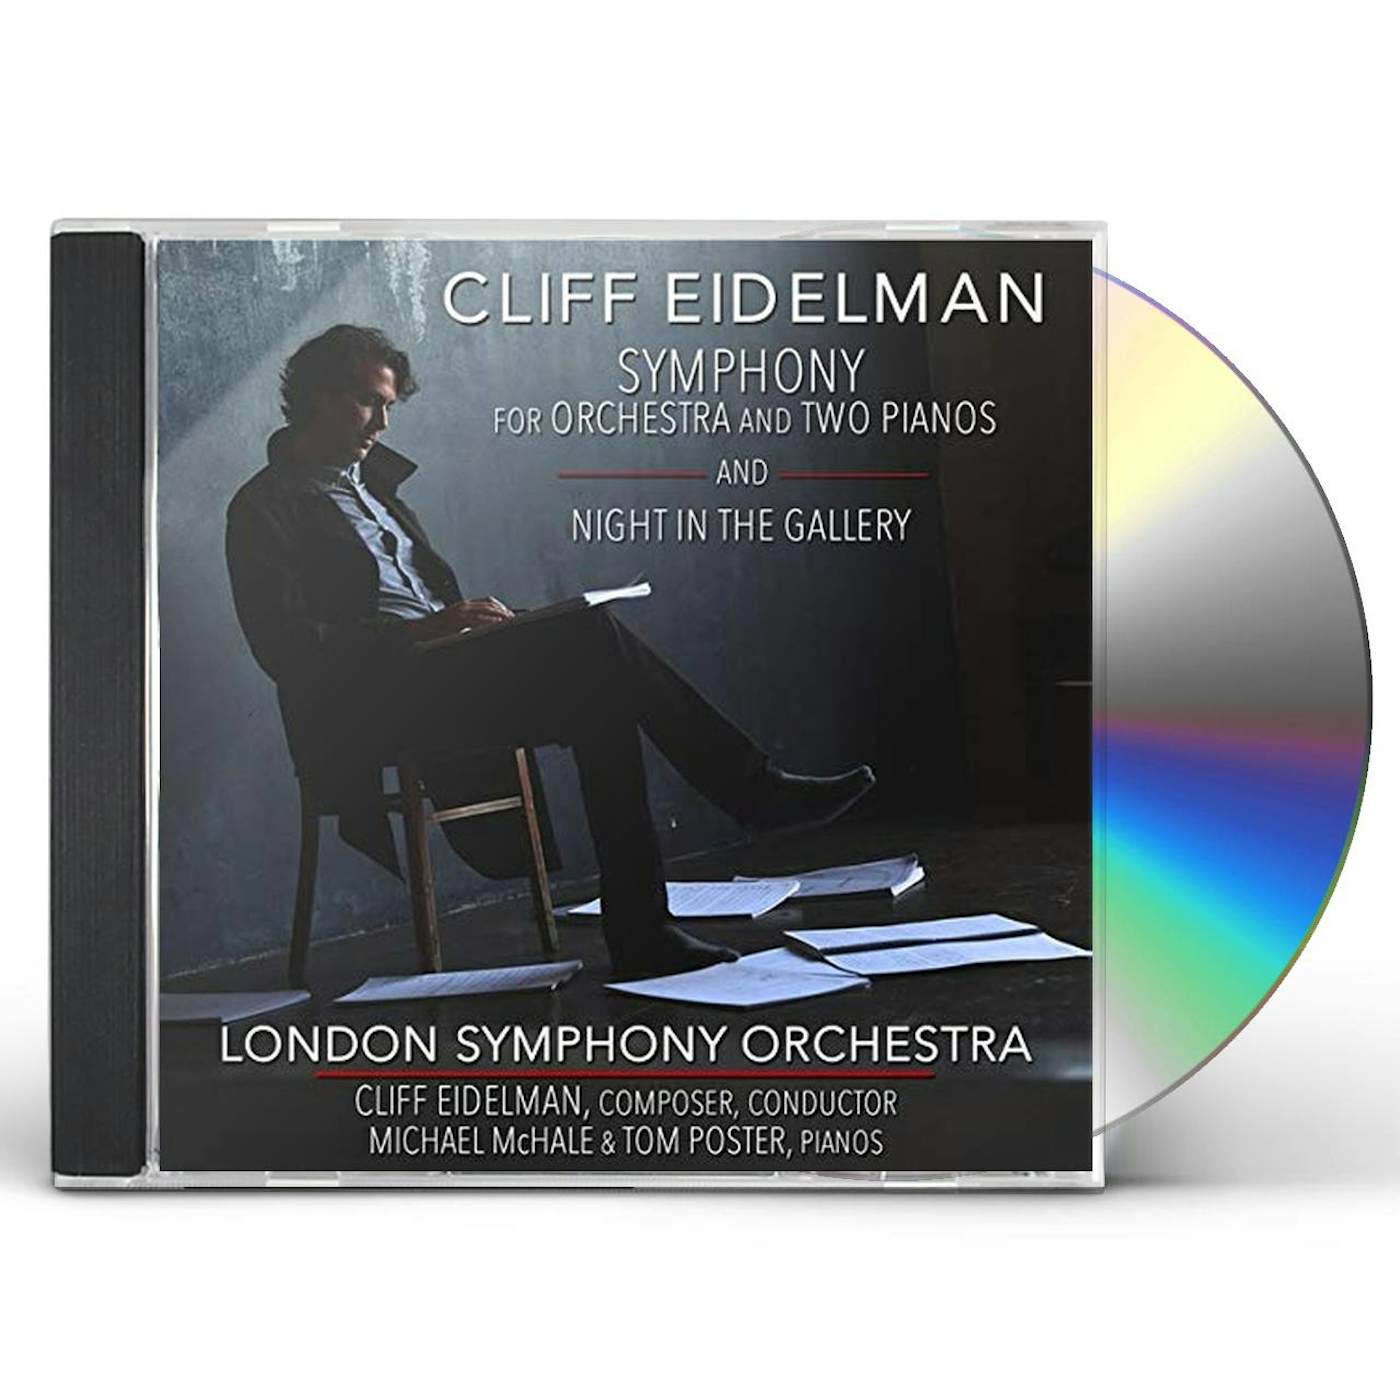 Cliff Eidelman SYM FOR ORCHESTRA & TWO PIANOS & NIGHT IN GALLERY CD